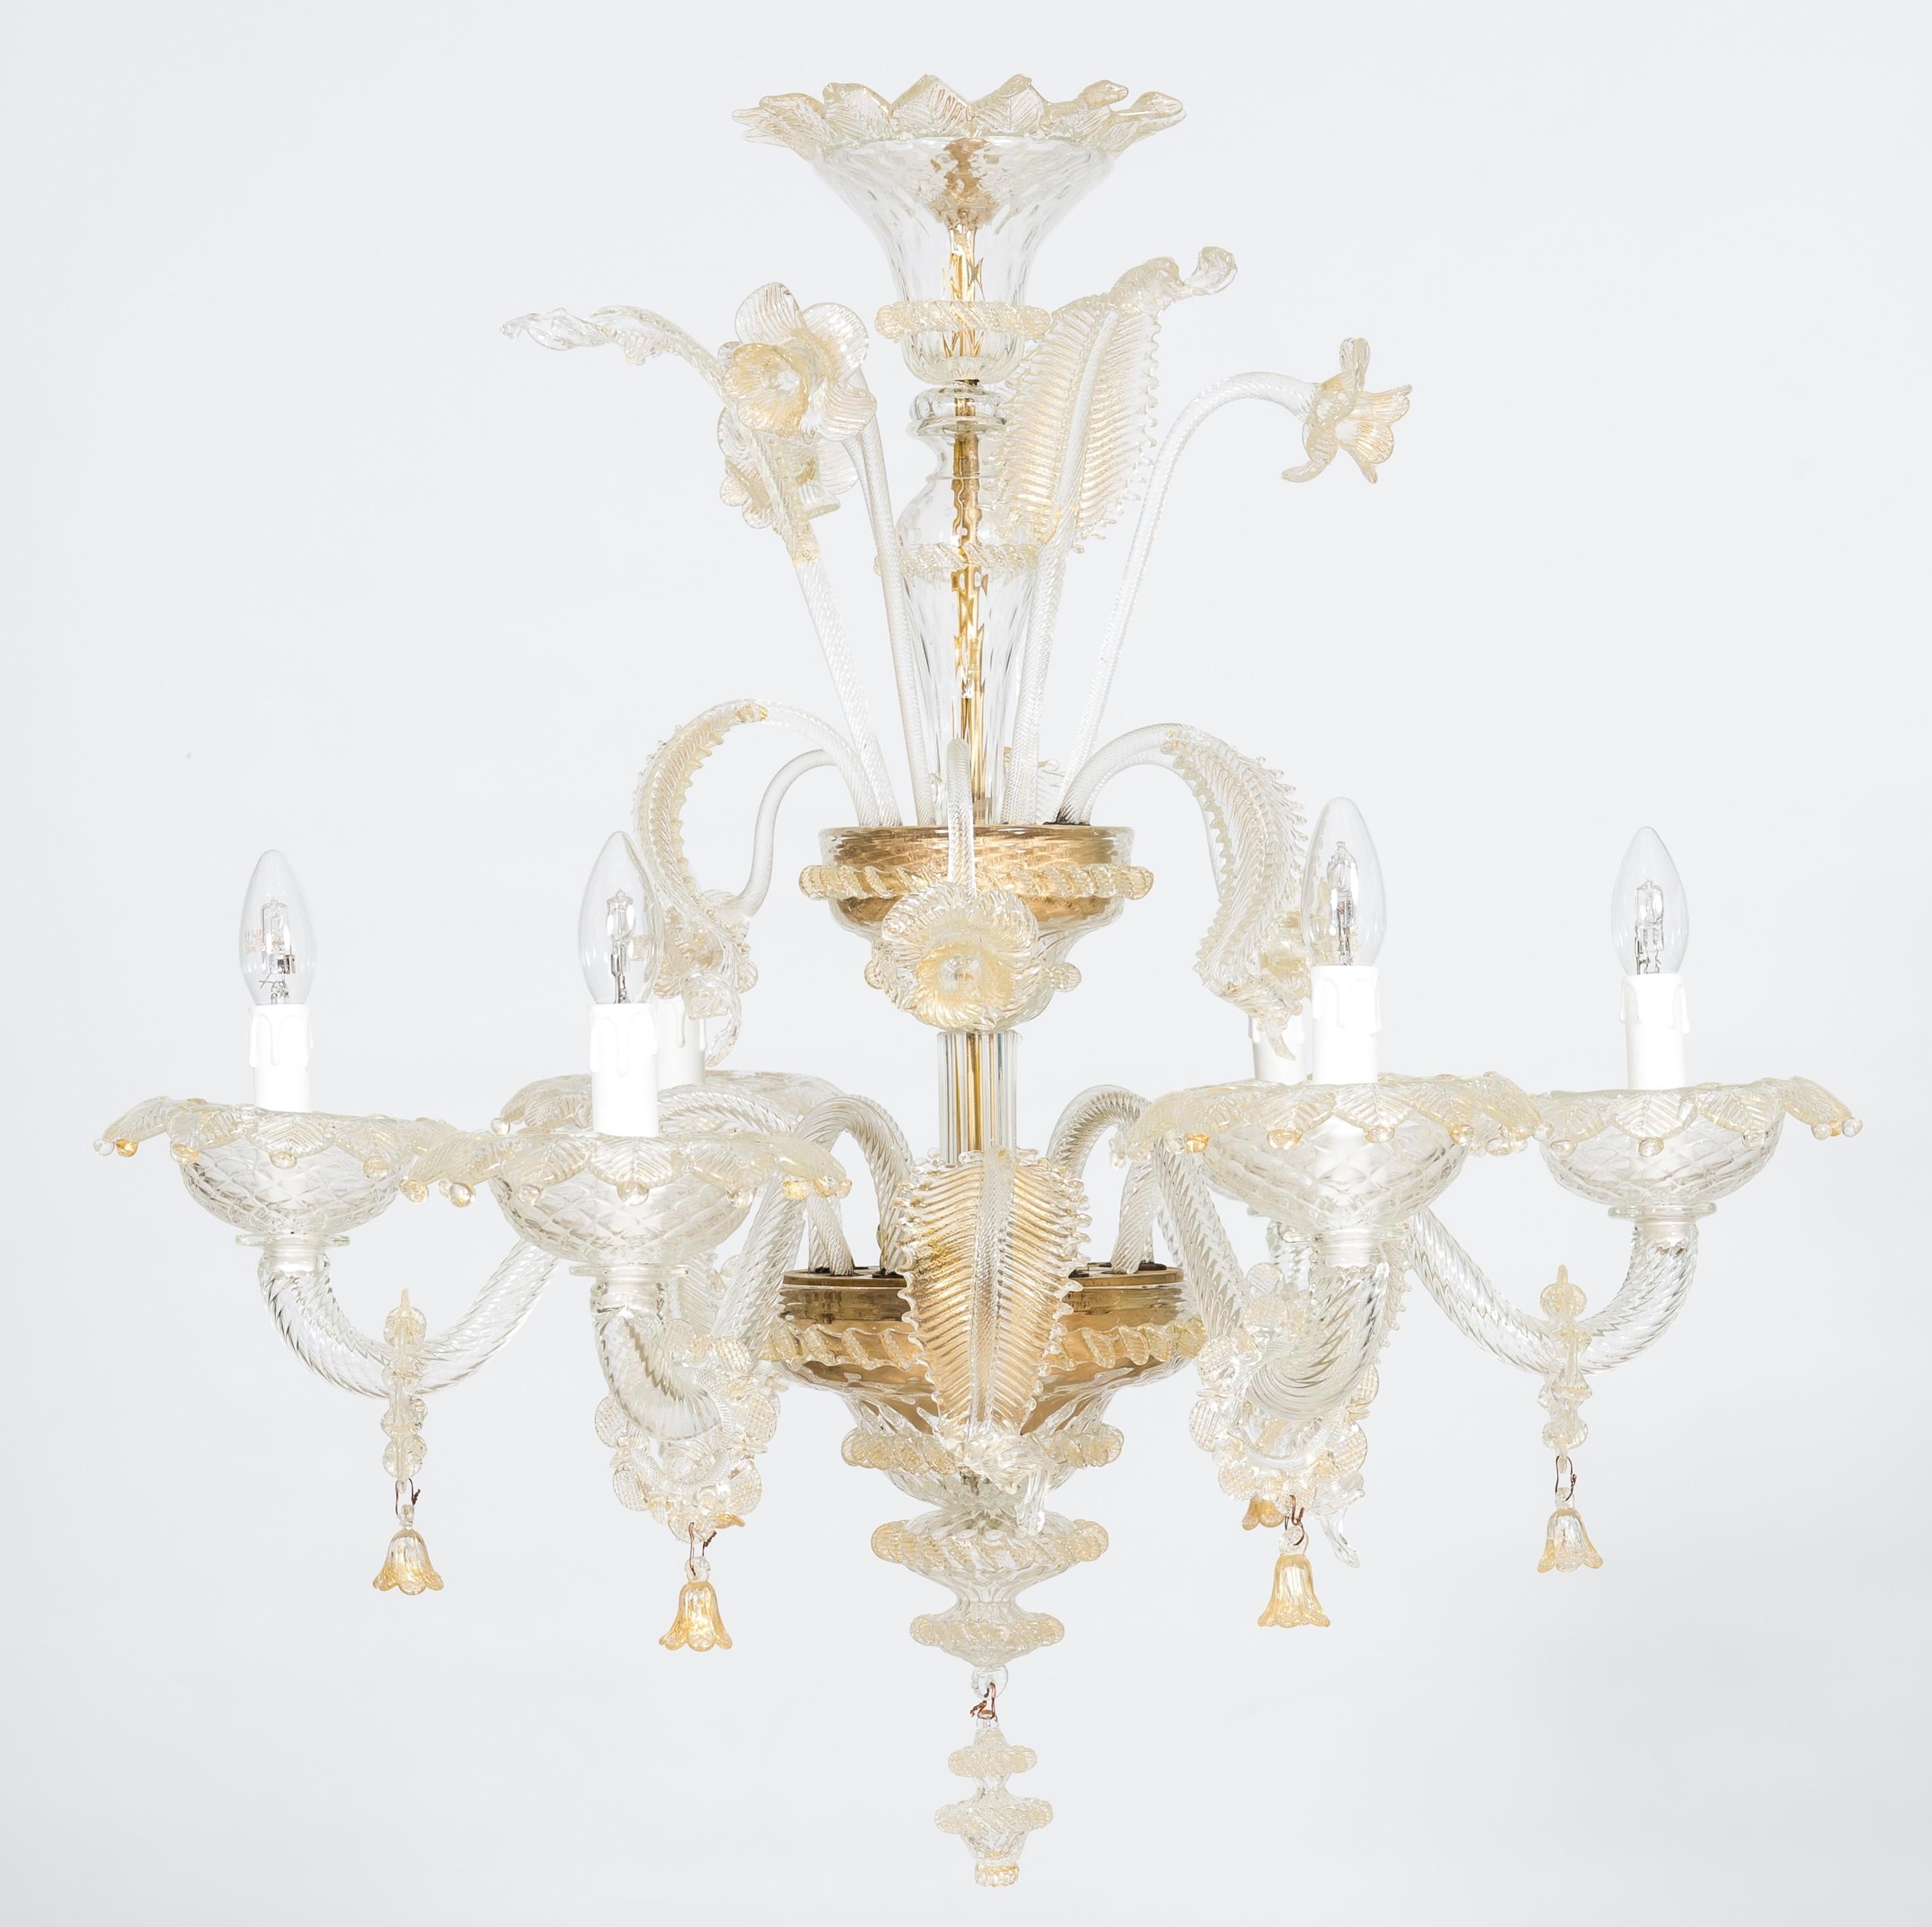 Floral Murano glass chandelier with “Riga Dritta” decorations, 20th century, Italy.
This beautiful chandelier was entirely made in the Italian island of Murano, utilizing the local glassmaking techniques. 
The central holder sustains 6 arms with